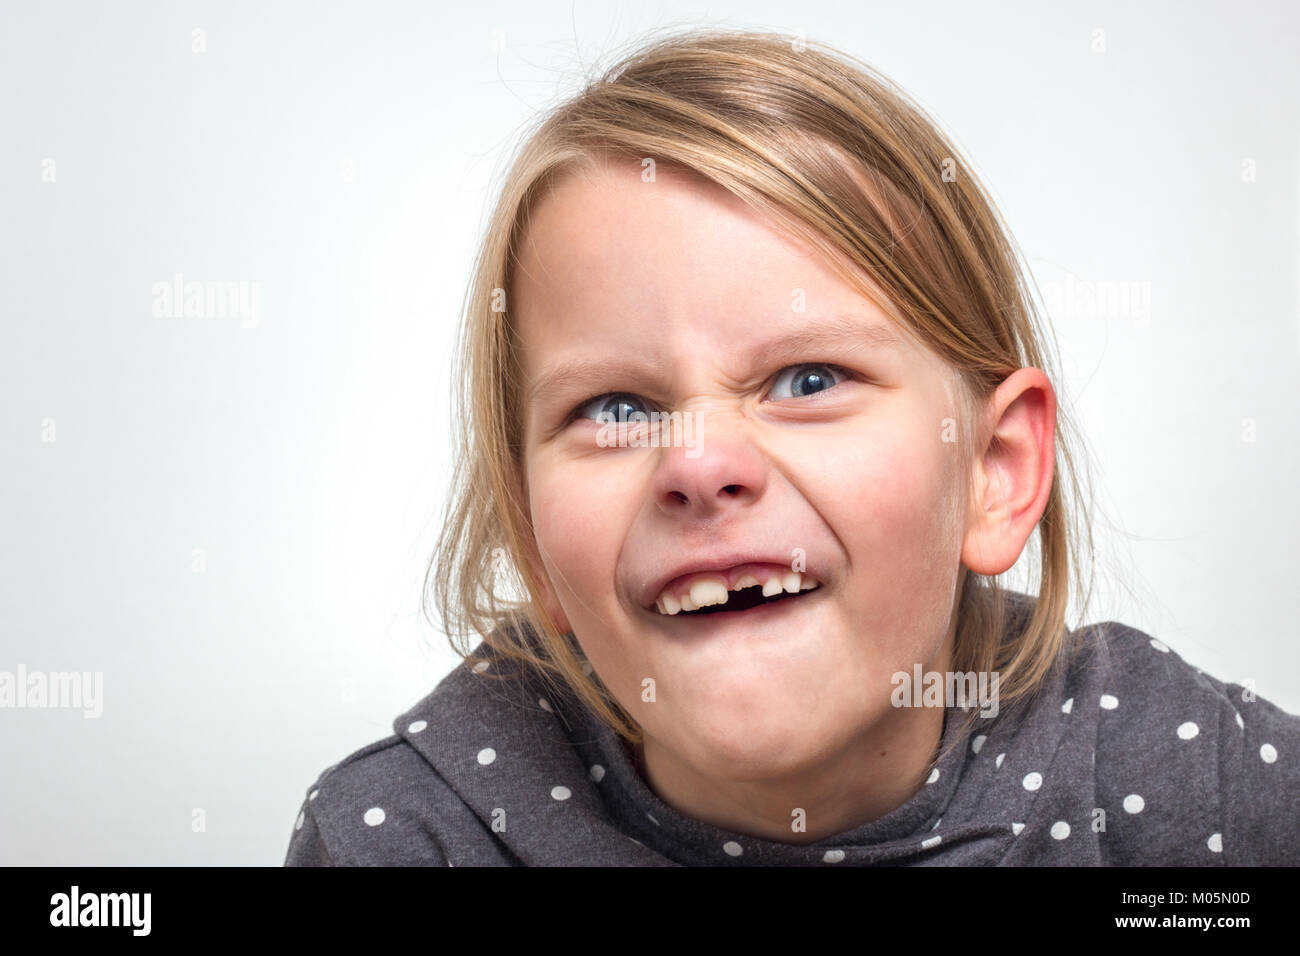 Girl shows her gap and makes a funny face Stock Photo